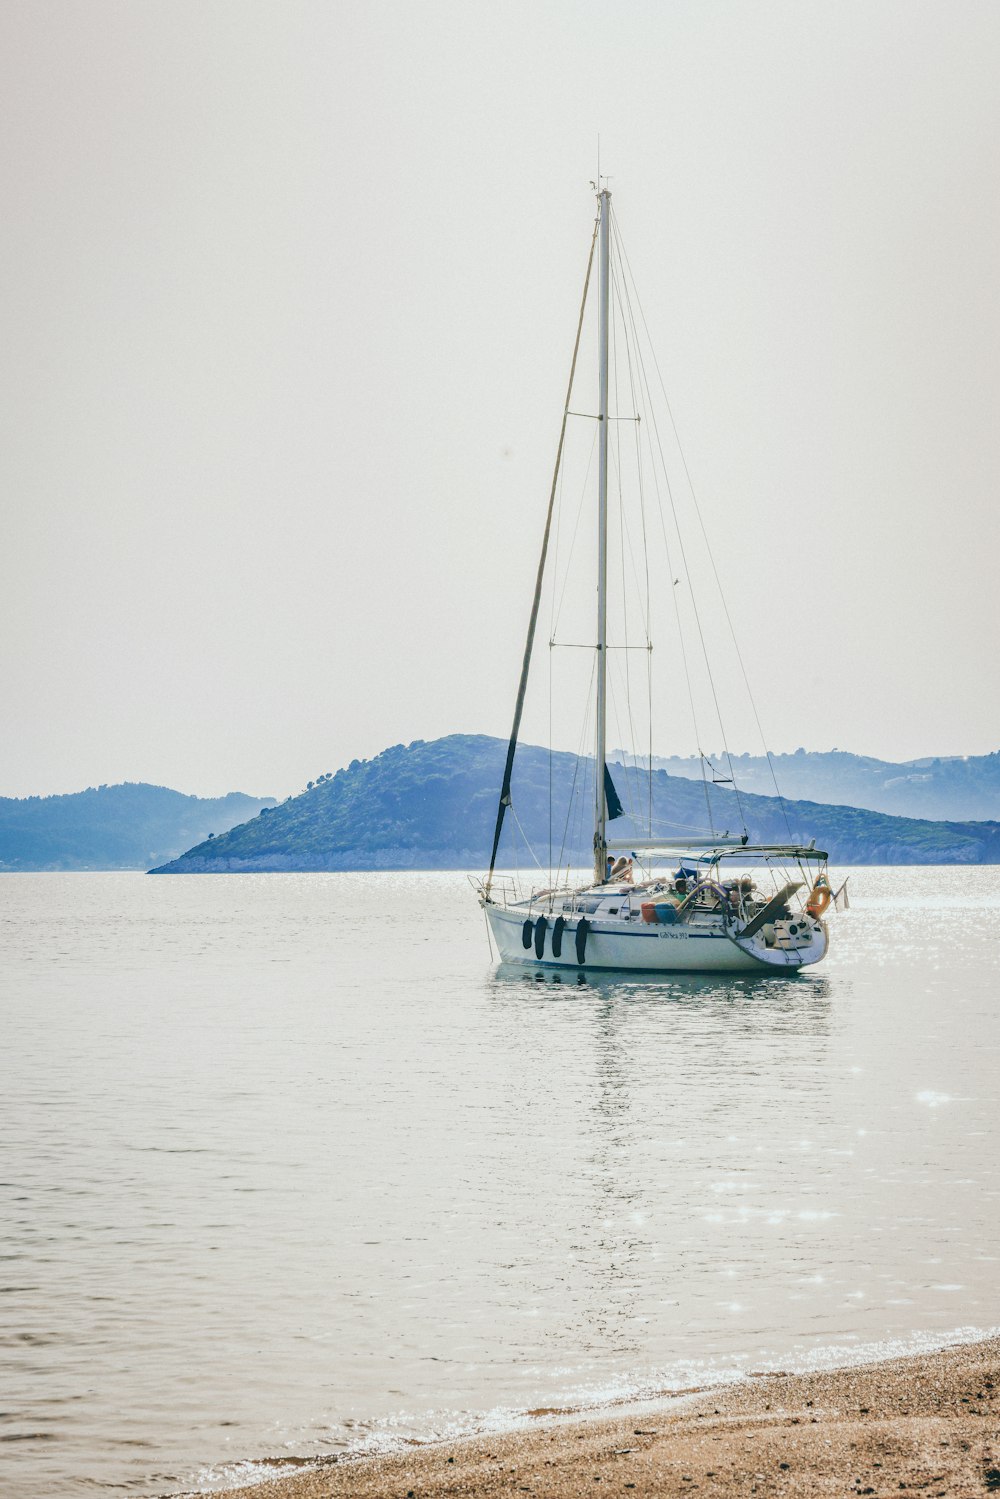 a sailboat on the water with mountains in the background